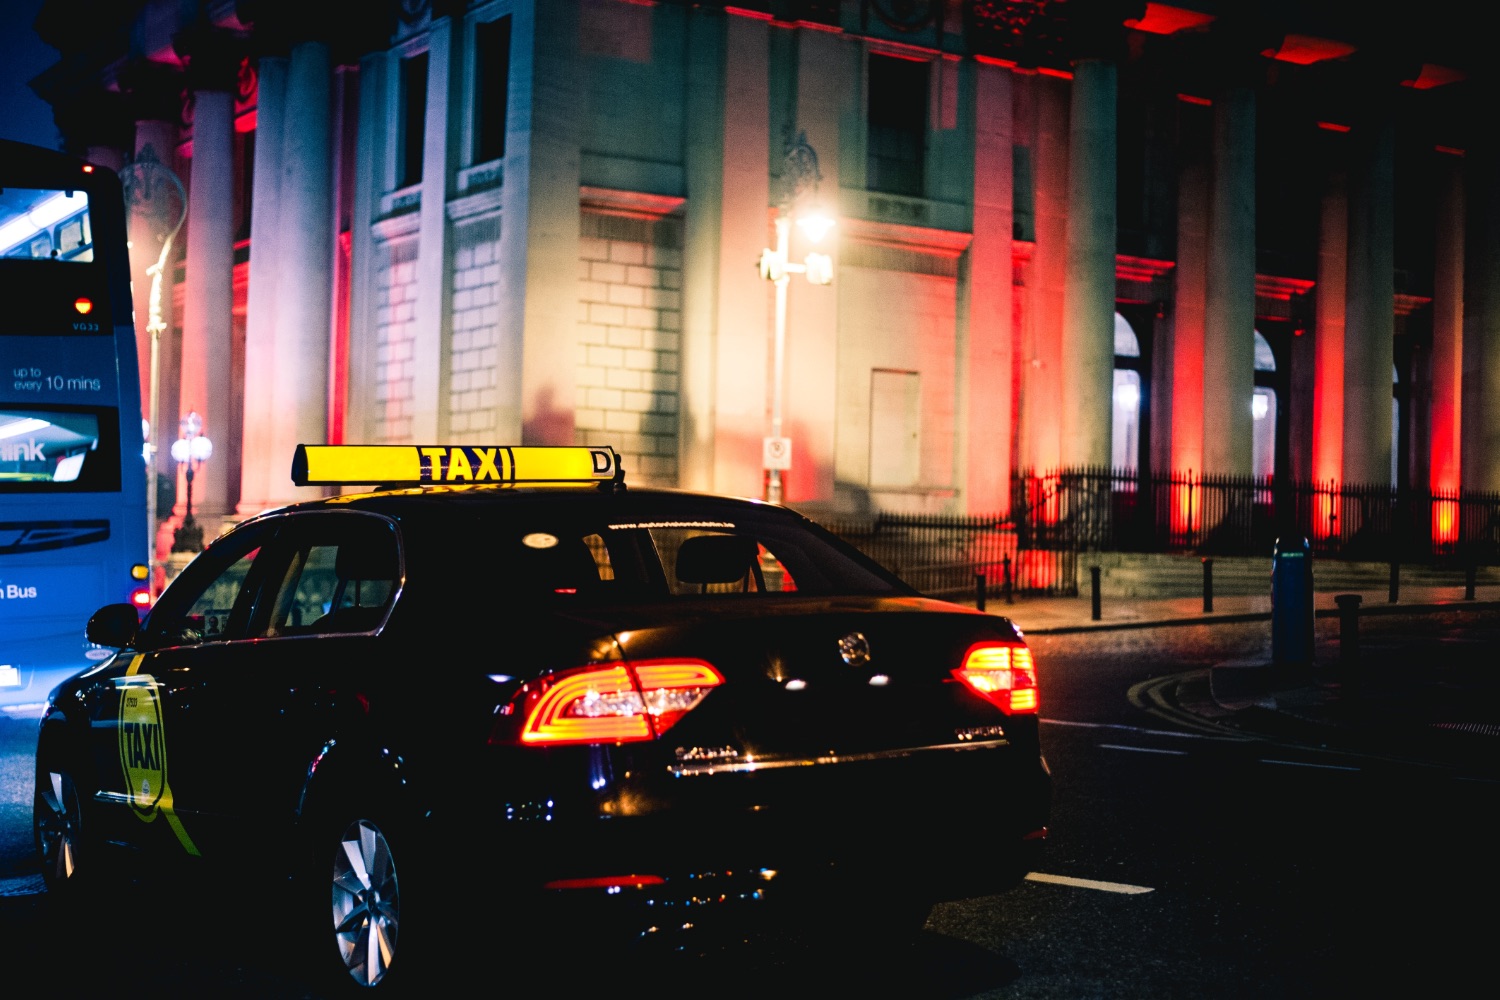 Lower insurance may mean more taxis